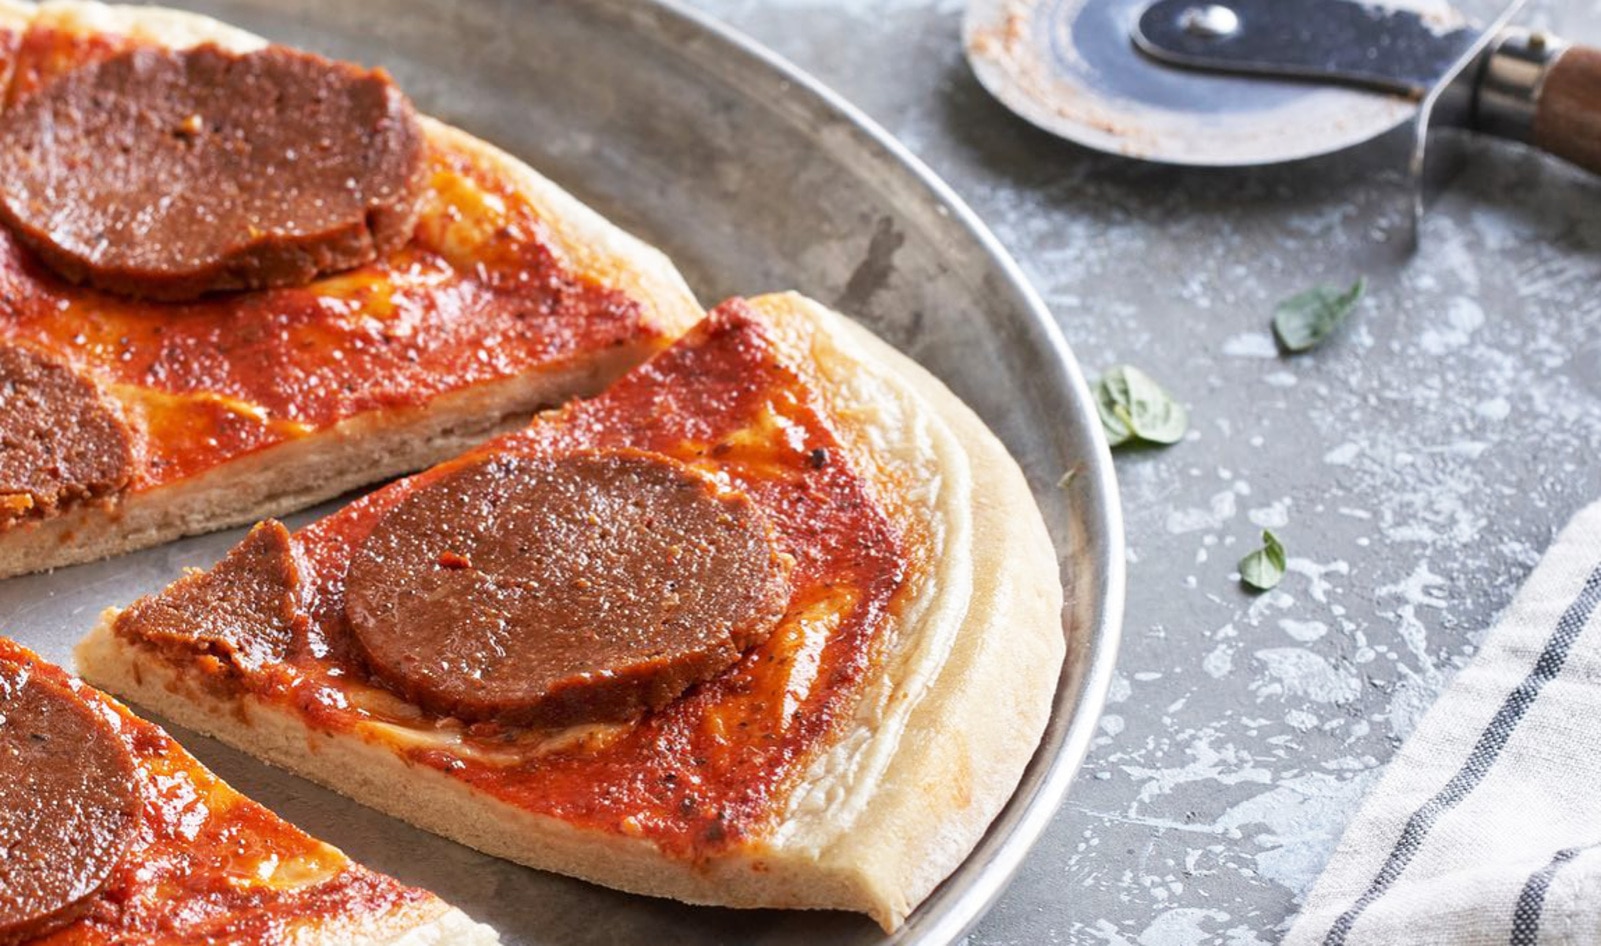 Vegan Pepperoni Is Now Available to 400 Pizza Providers